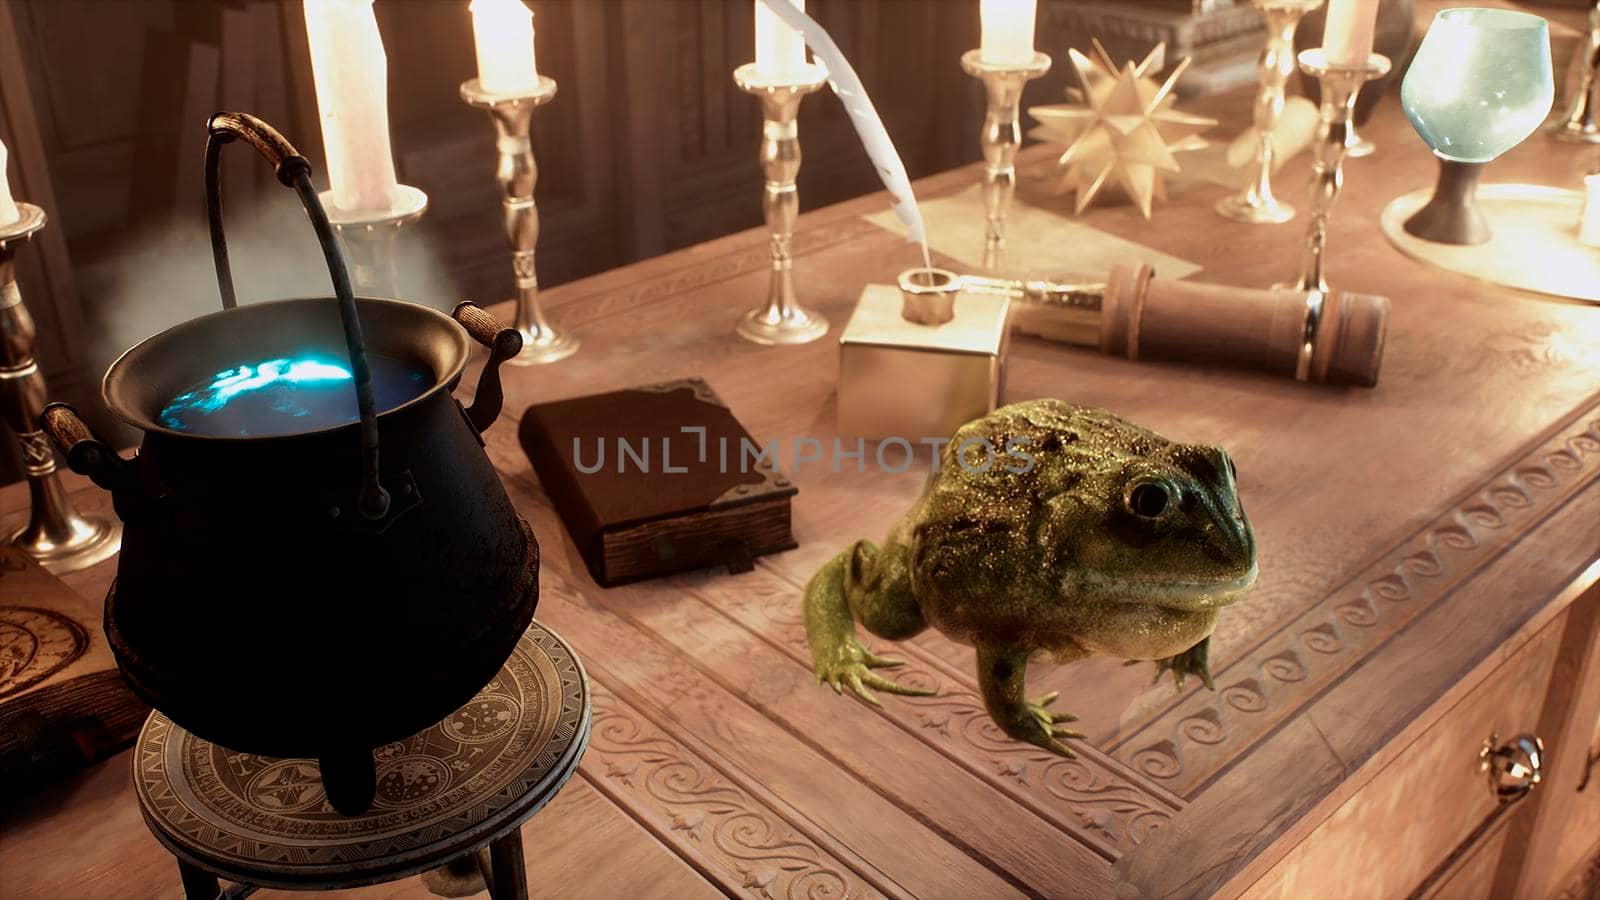 On the alchemist's table is a green big toad and a pot of steaming potion. View of the ancient alchemist's table.